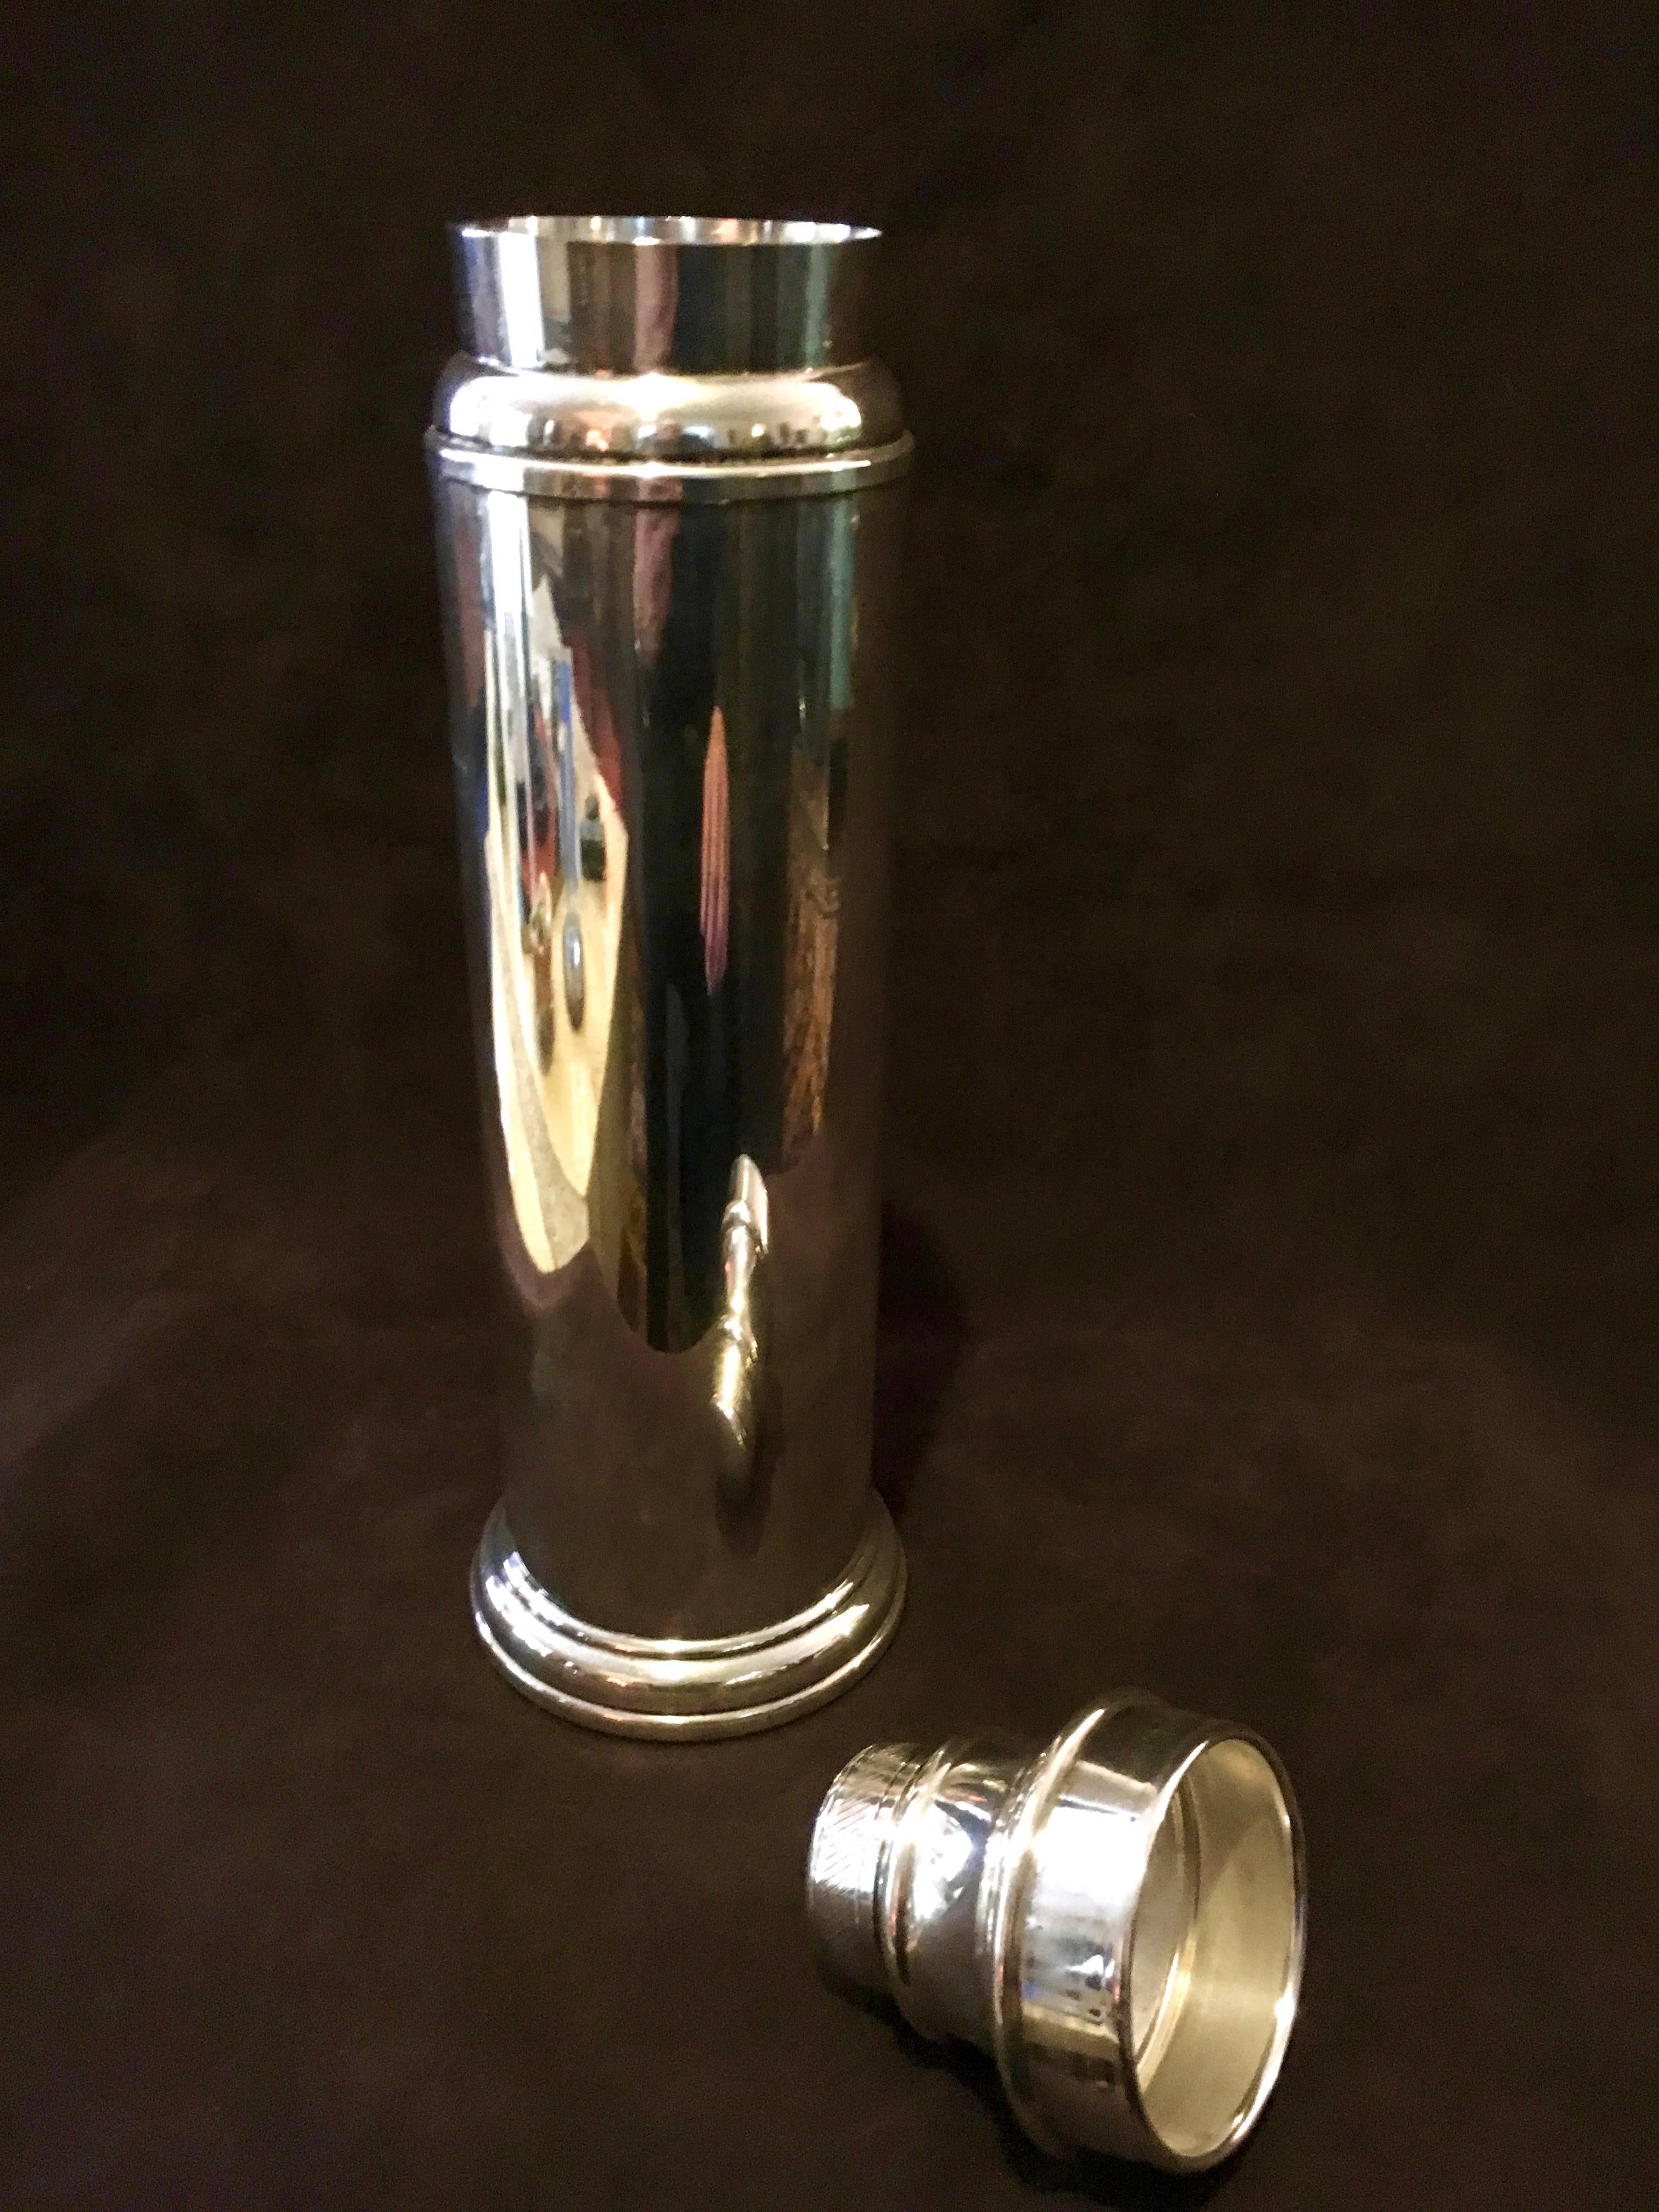 Midcentury Vintage Silver Plate Cocktail Shaker, circa. 1930s

Cocktail Shaker is exceptional and in very good condition for a piece from the early part of the 20th Century - no dings or dents - in three pieces with a strainer for those yumilicious